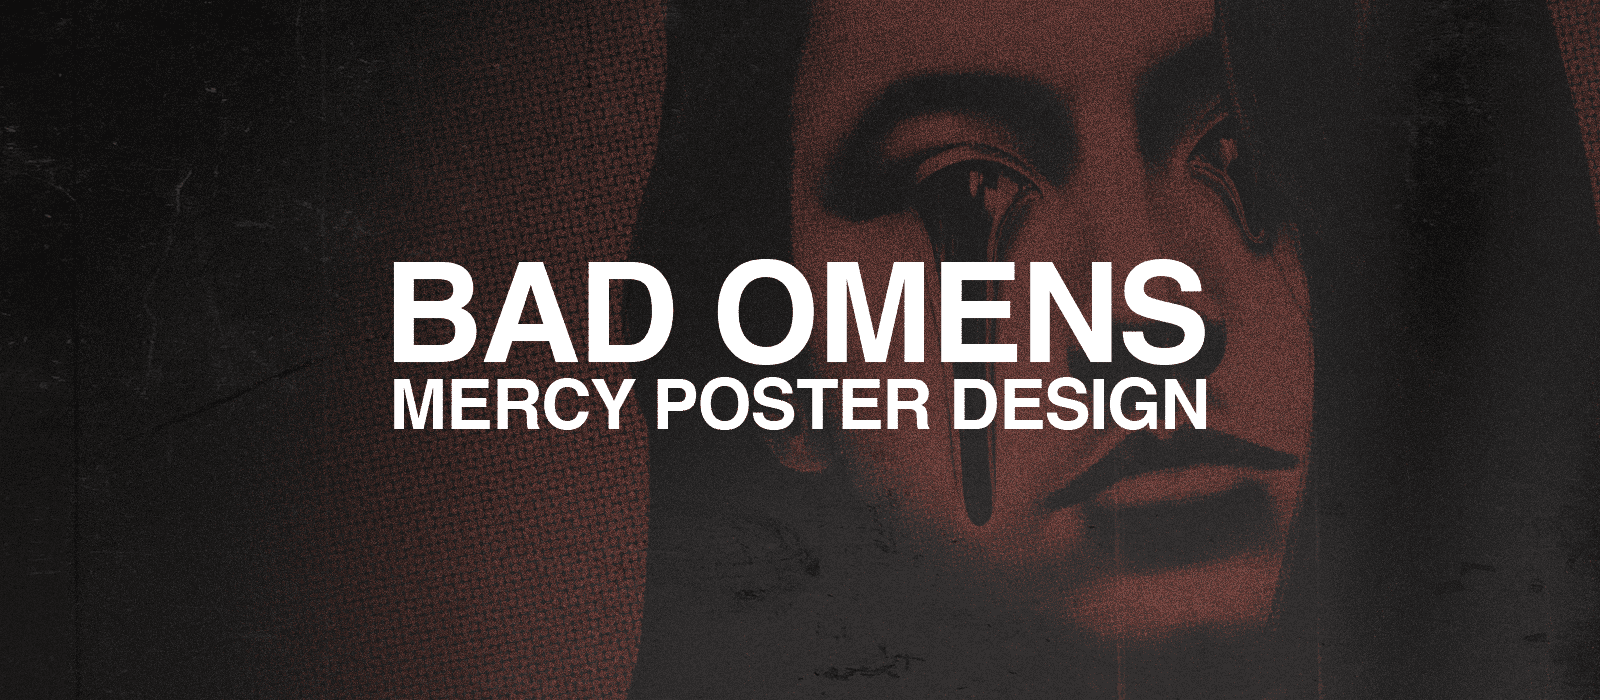 Header for poster design showing title and face in the background